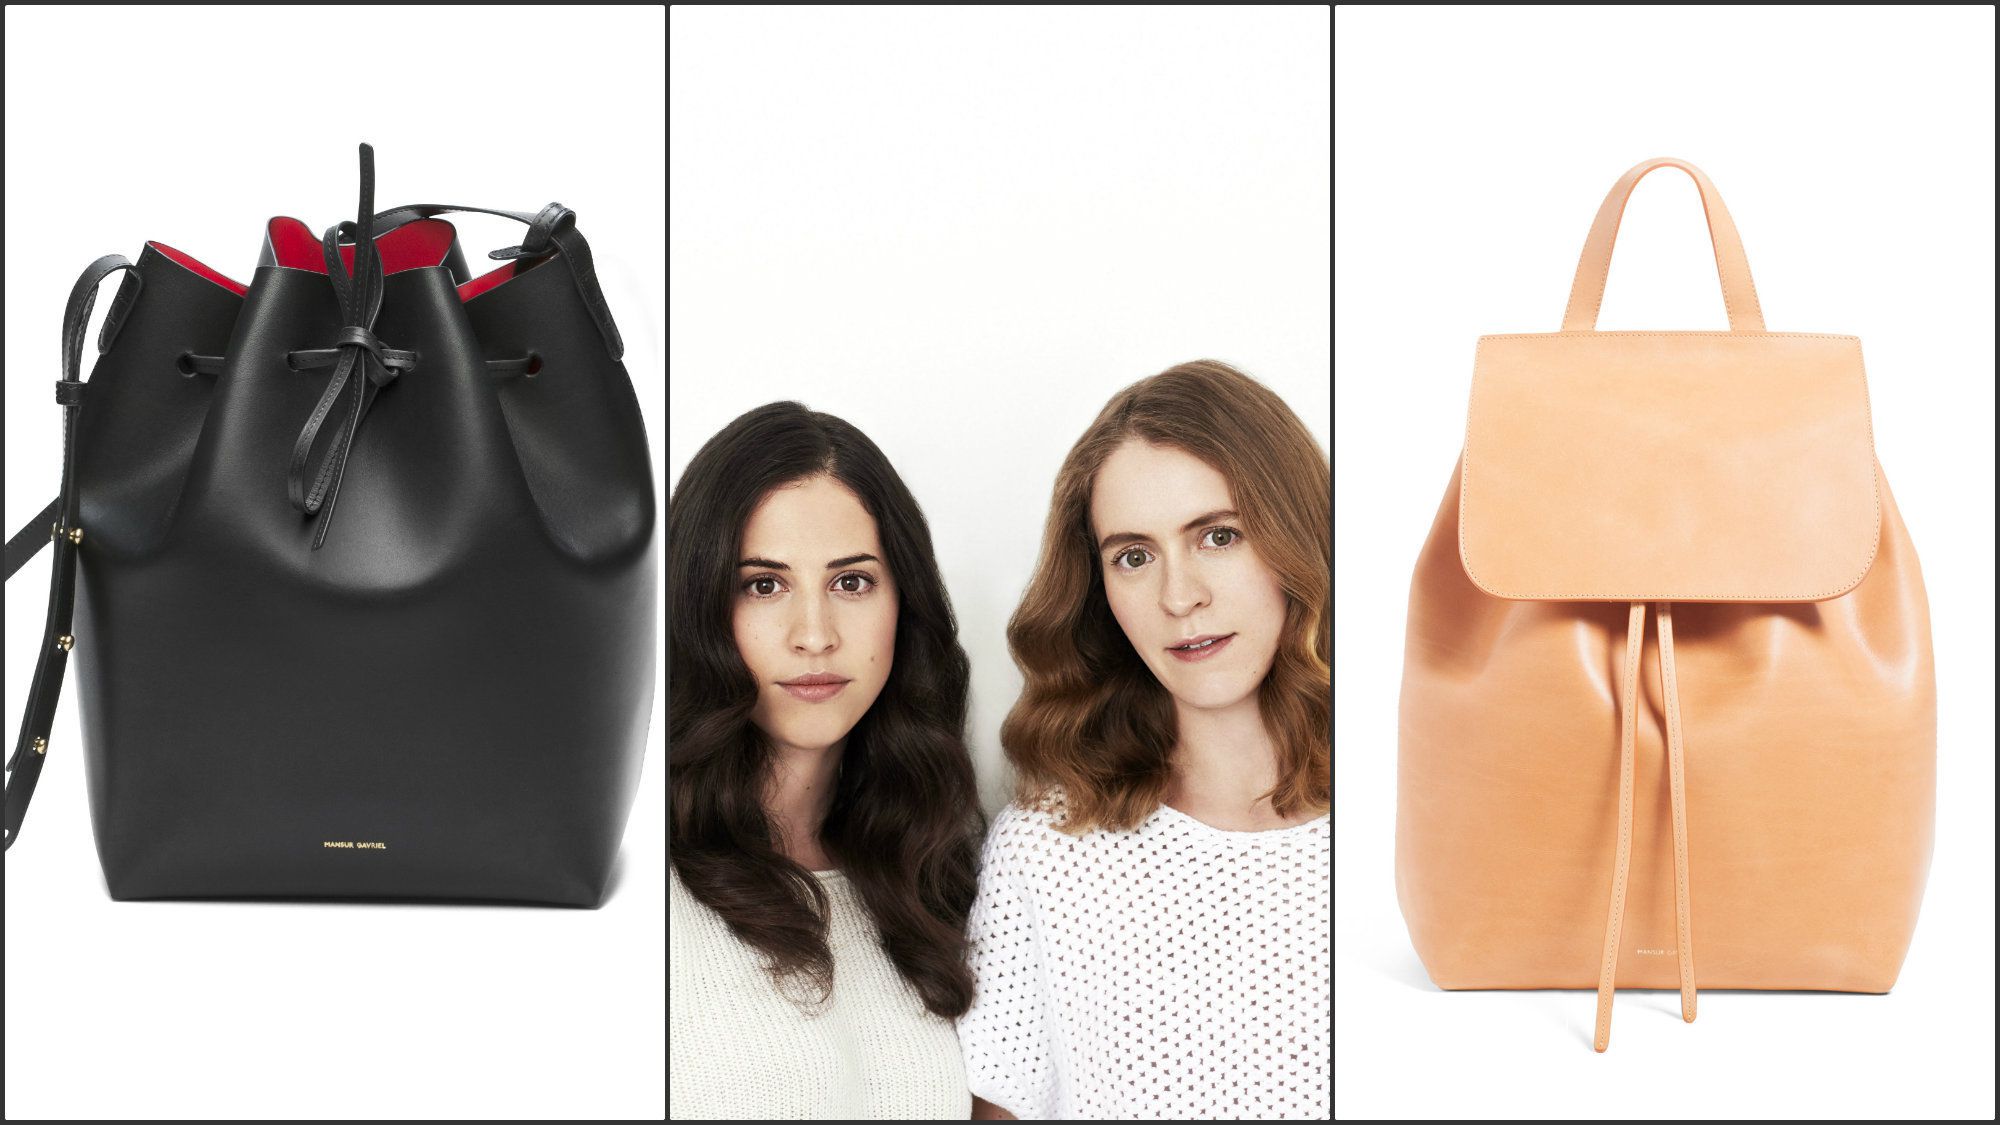 I Have A Mansur Gavriel Large Lady Bag and Feel Terrible About It